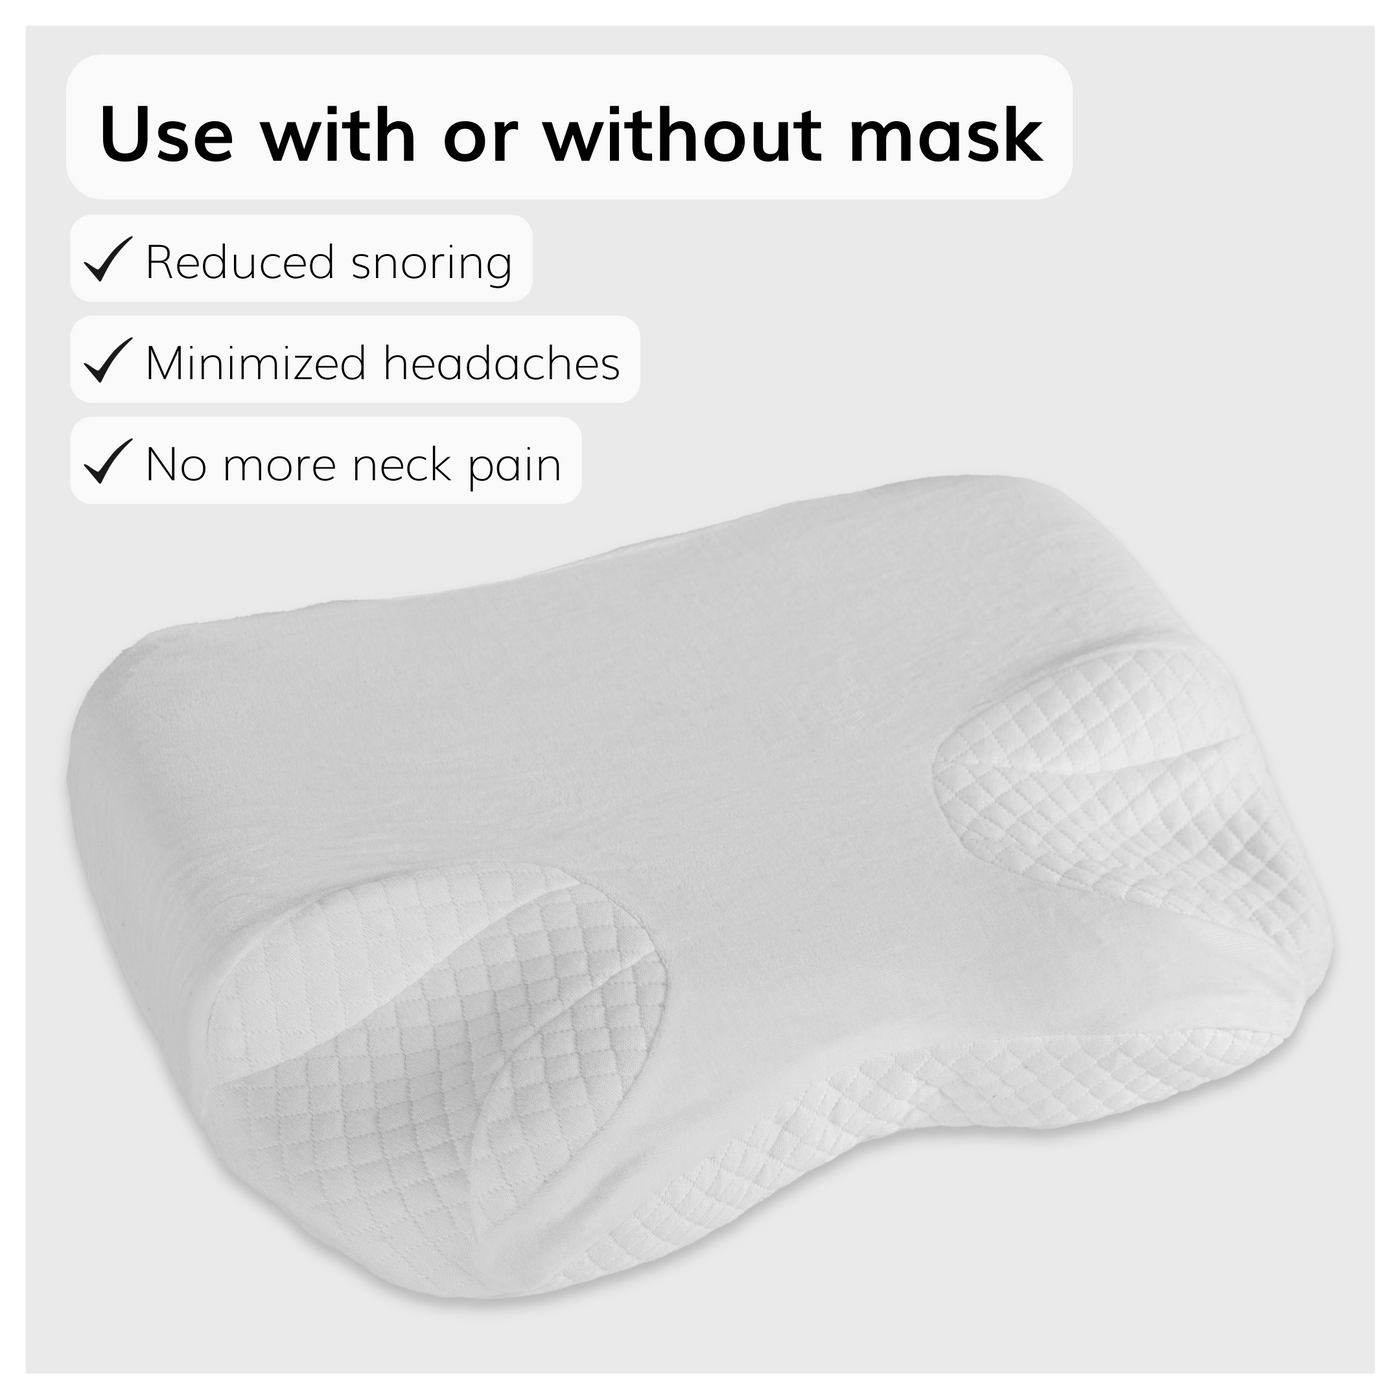 Our CPAP memory foam pillow can be used with or without a mask to prevent snoring and reduce headaches